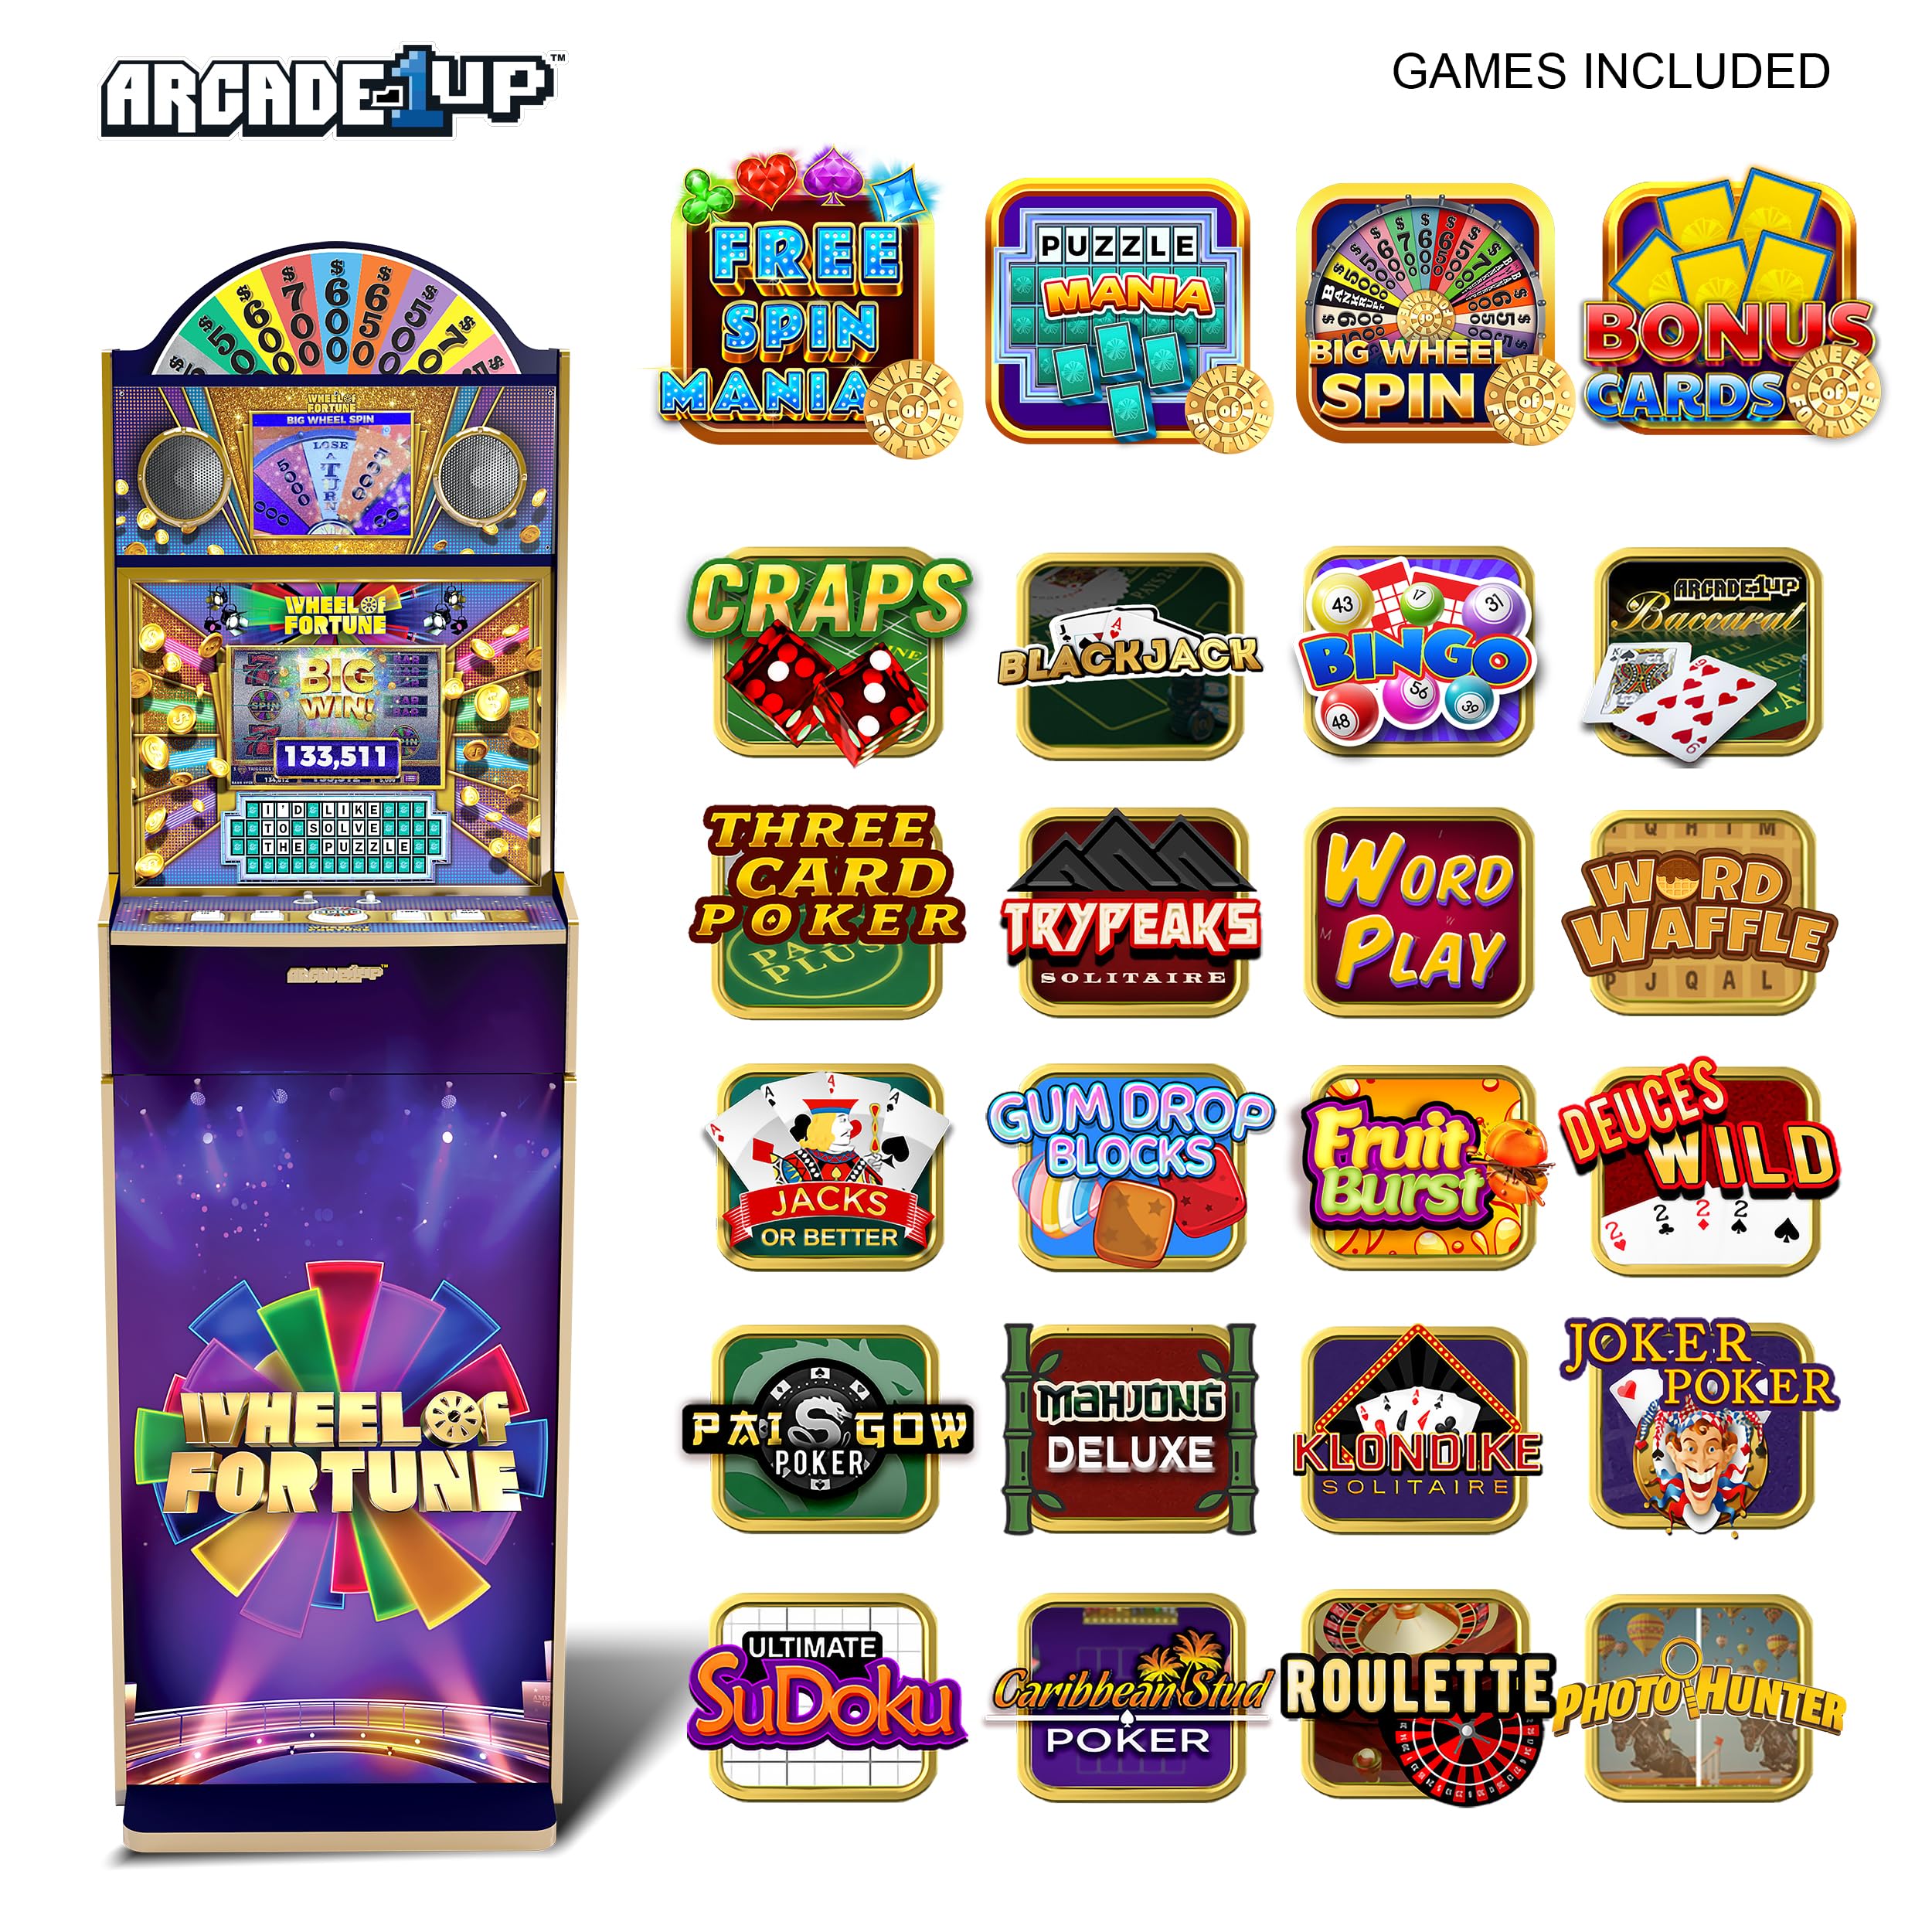 Wheel of Fortune Casinocade Deluxe Arcade Machine for Home, Over 5-feet-Tall Stand-up Cabinet, and 24 Games